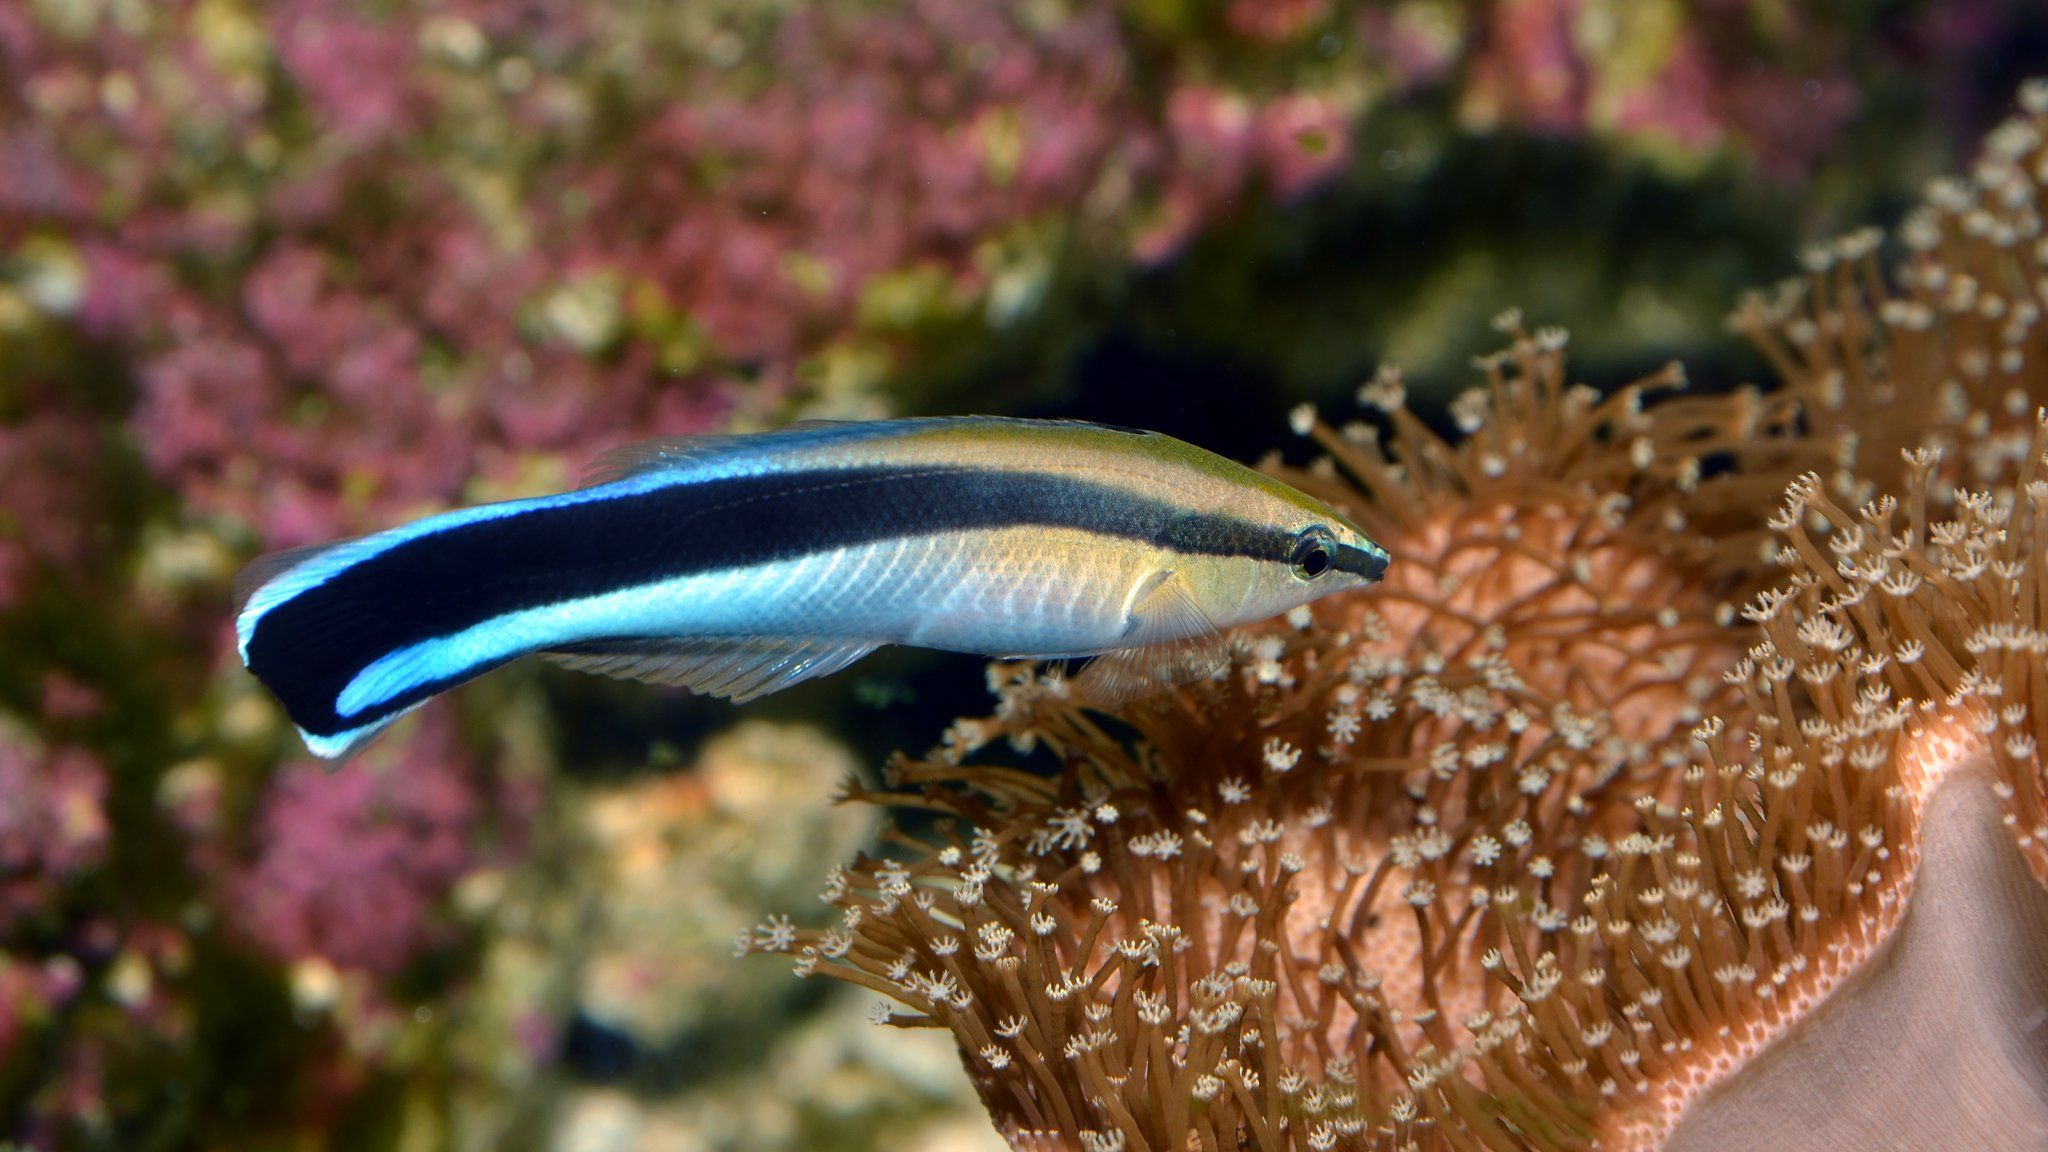 Cleaner wrasse fish